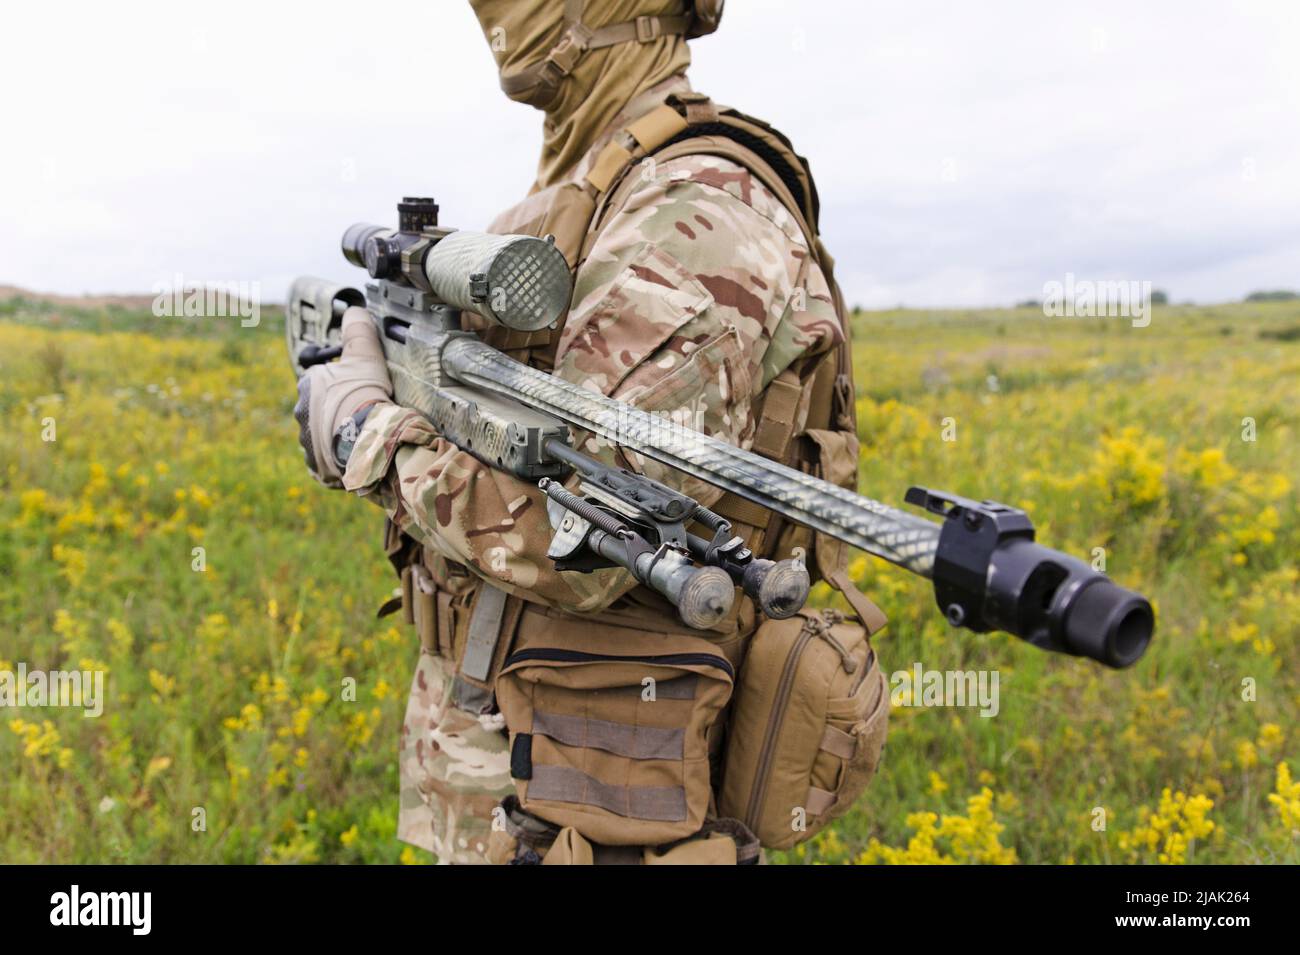 Soldier with sniper rifle standing in blooming green field. Stock Photo